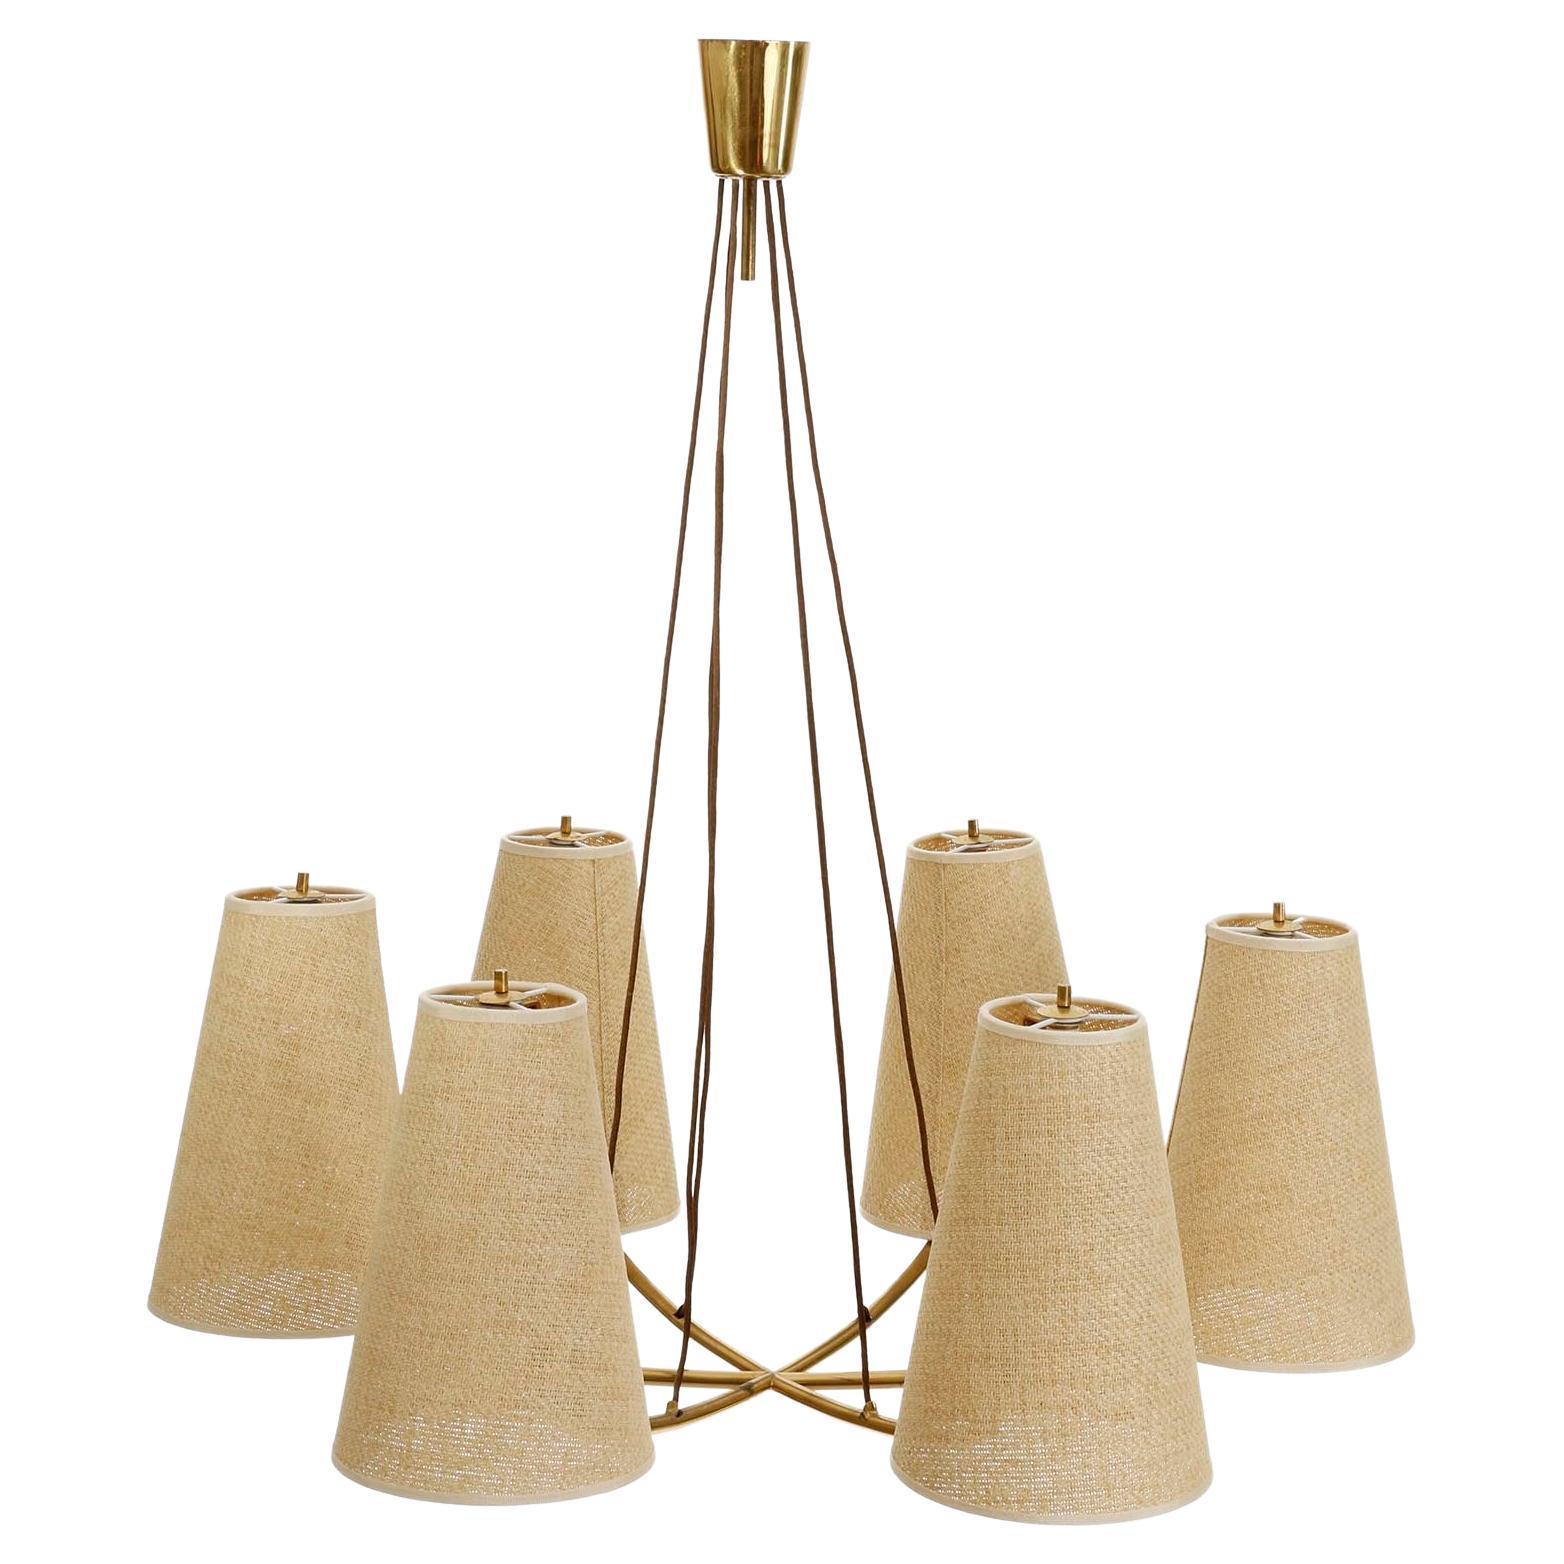 Mid-20th Century Pair of Pendant Lights Chandeliers 'Mexico' J.T. Kalmar, Brass Cane Wicker, 1960 For Sale